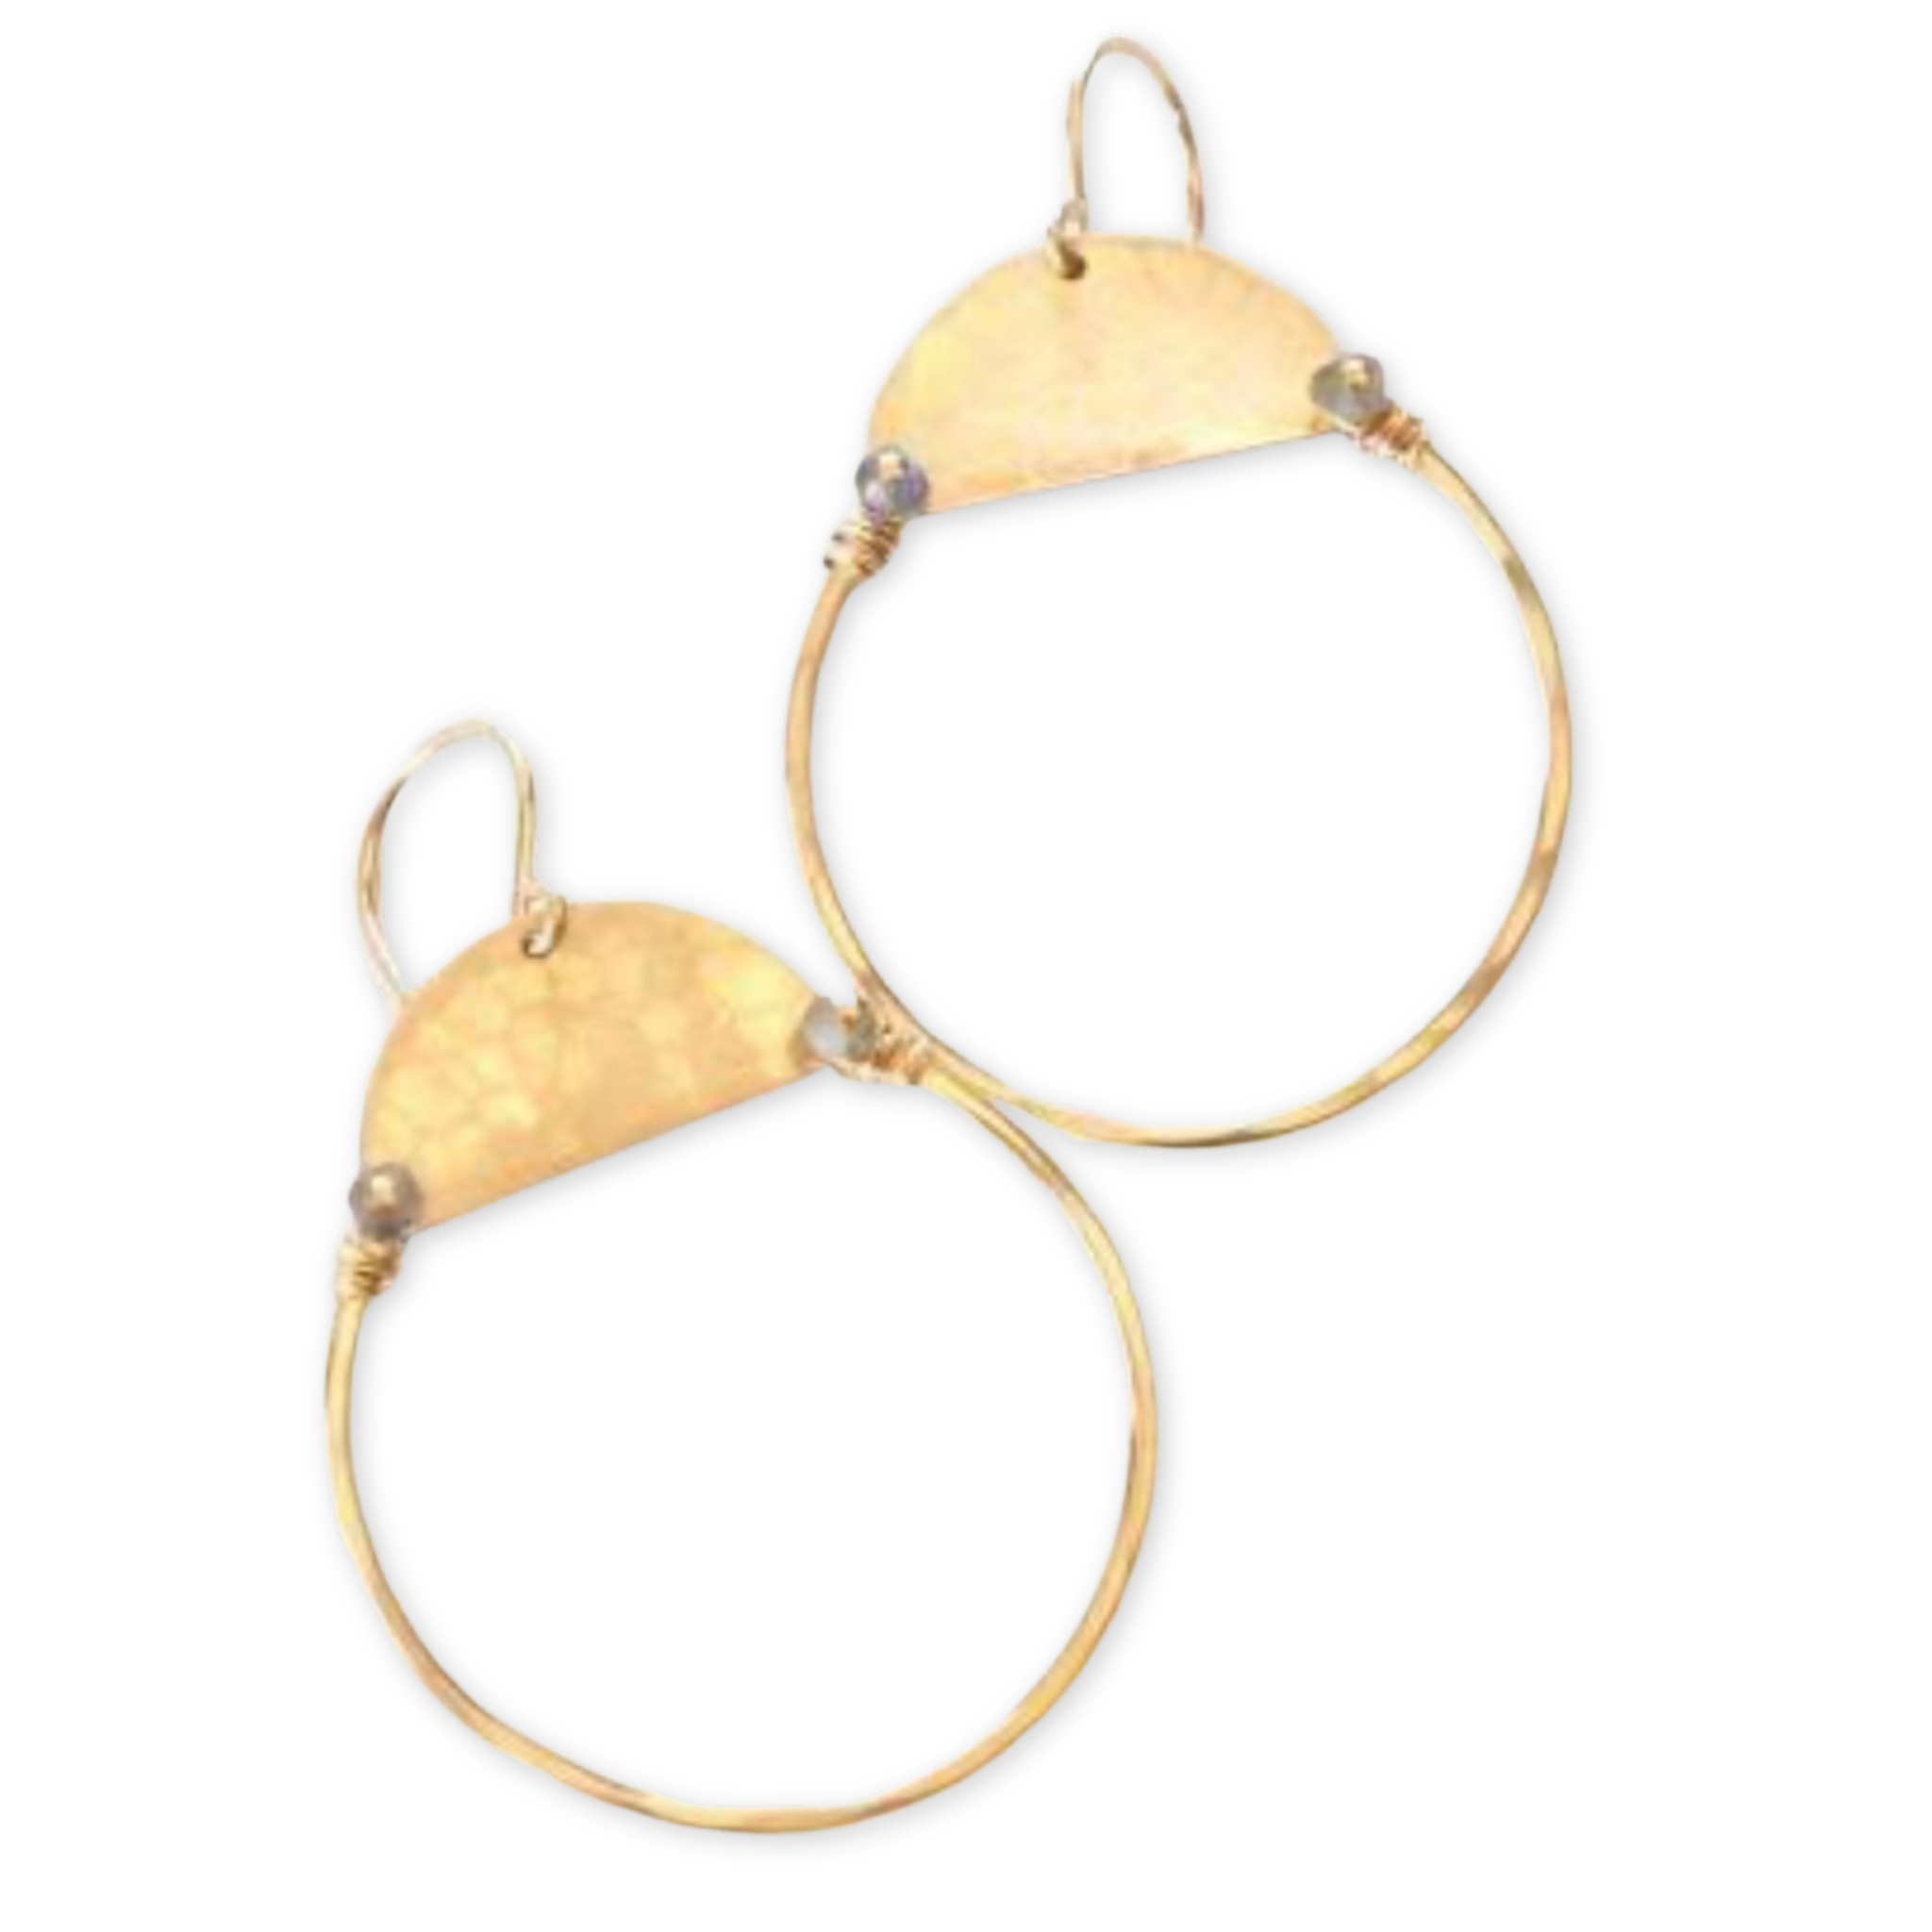 hammered half circle earrings with a hammered hoop connected by labradorite stones